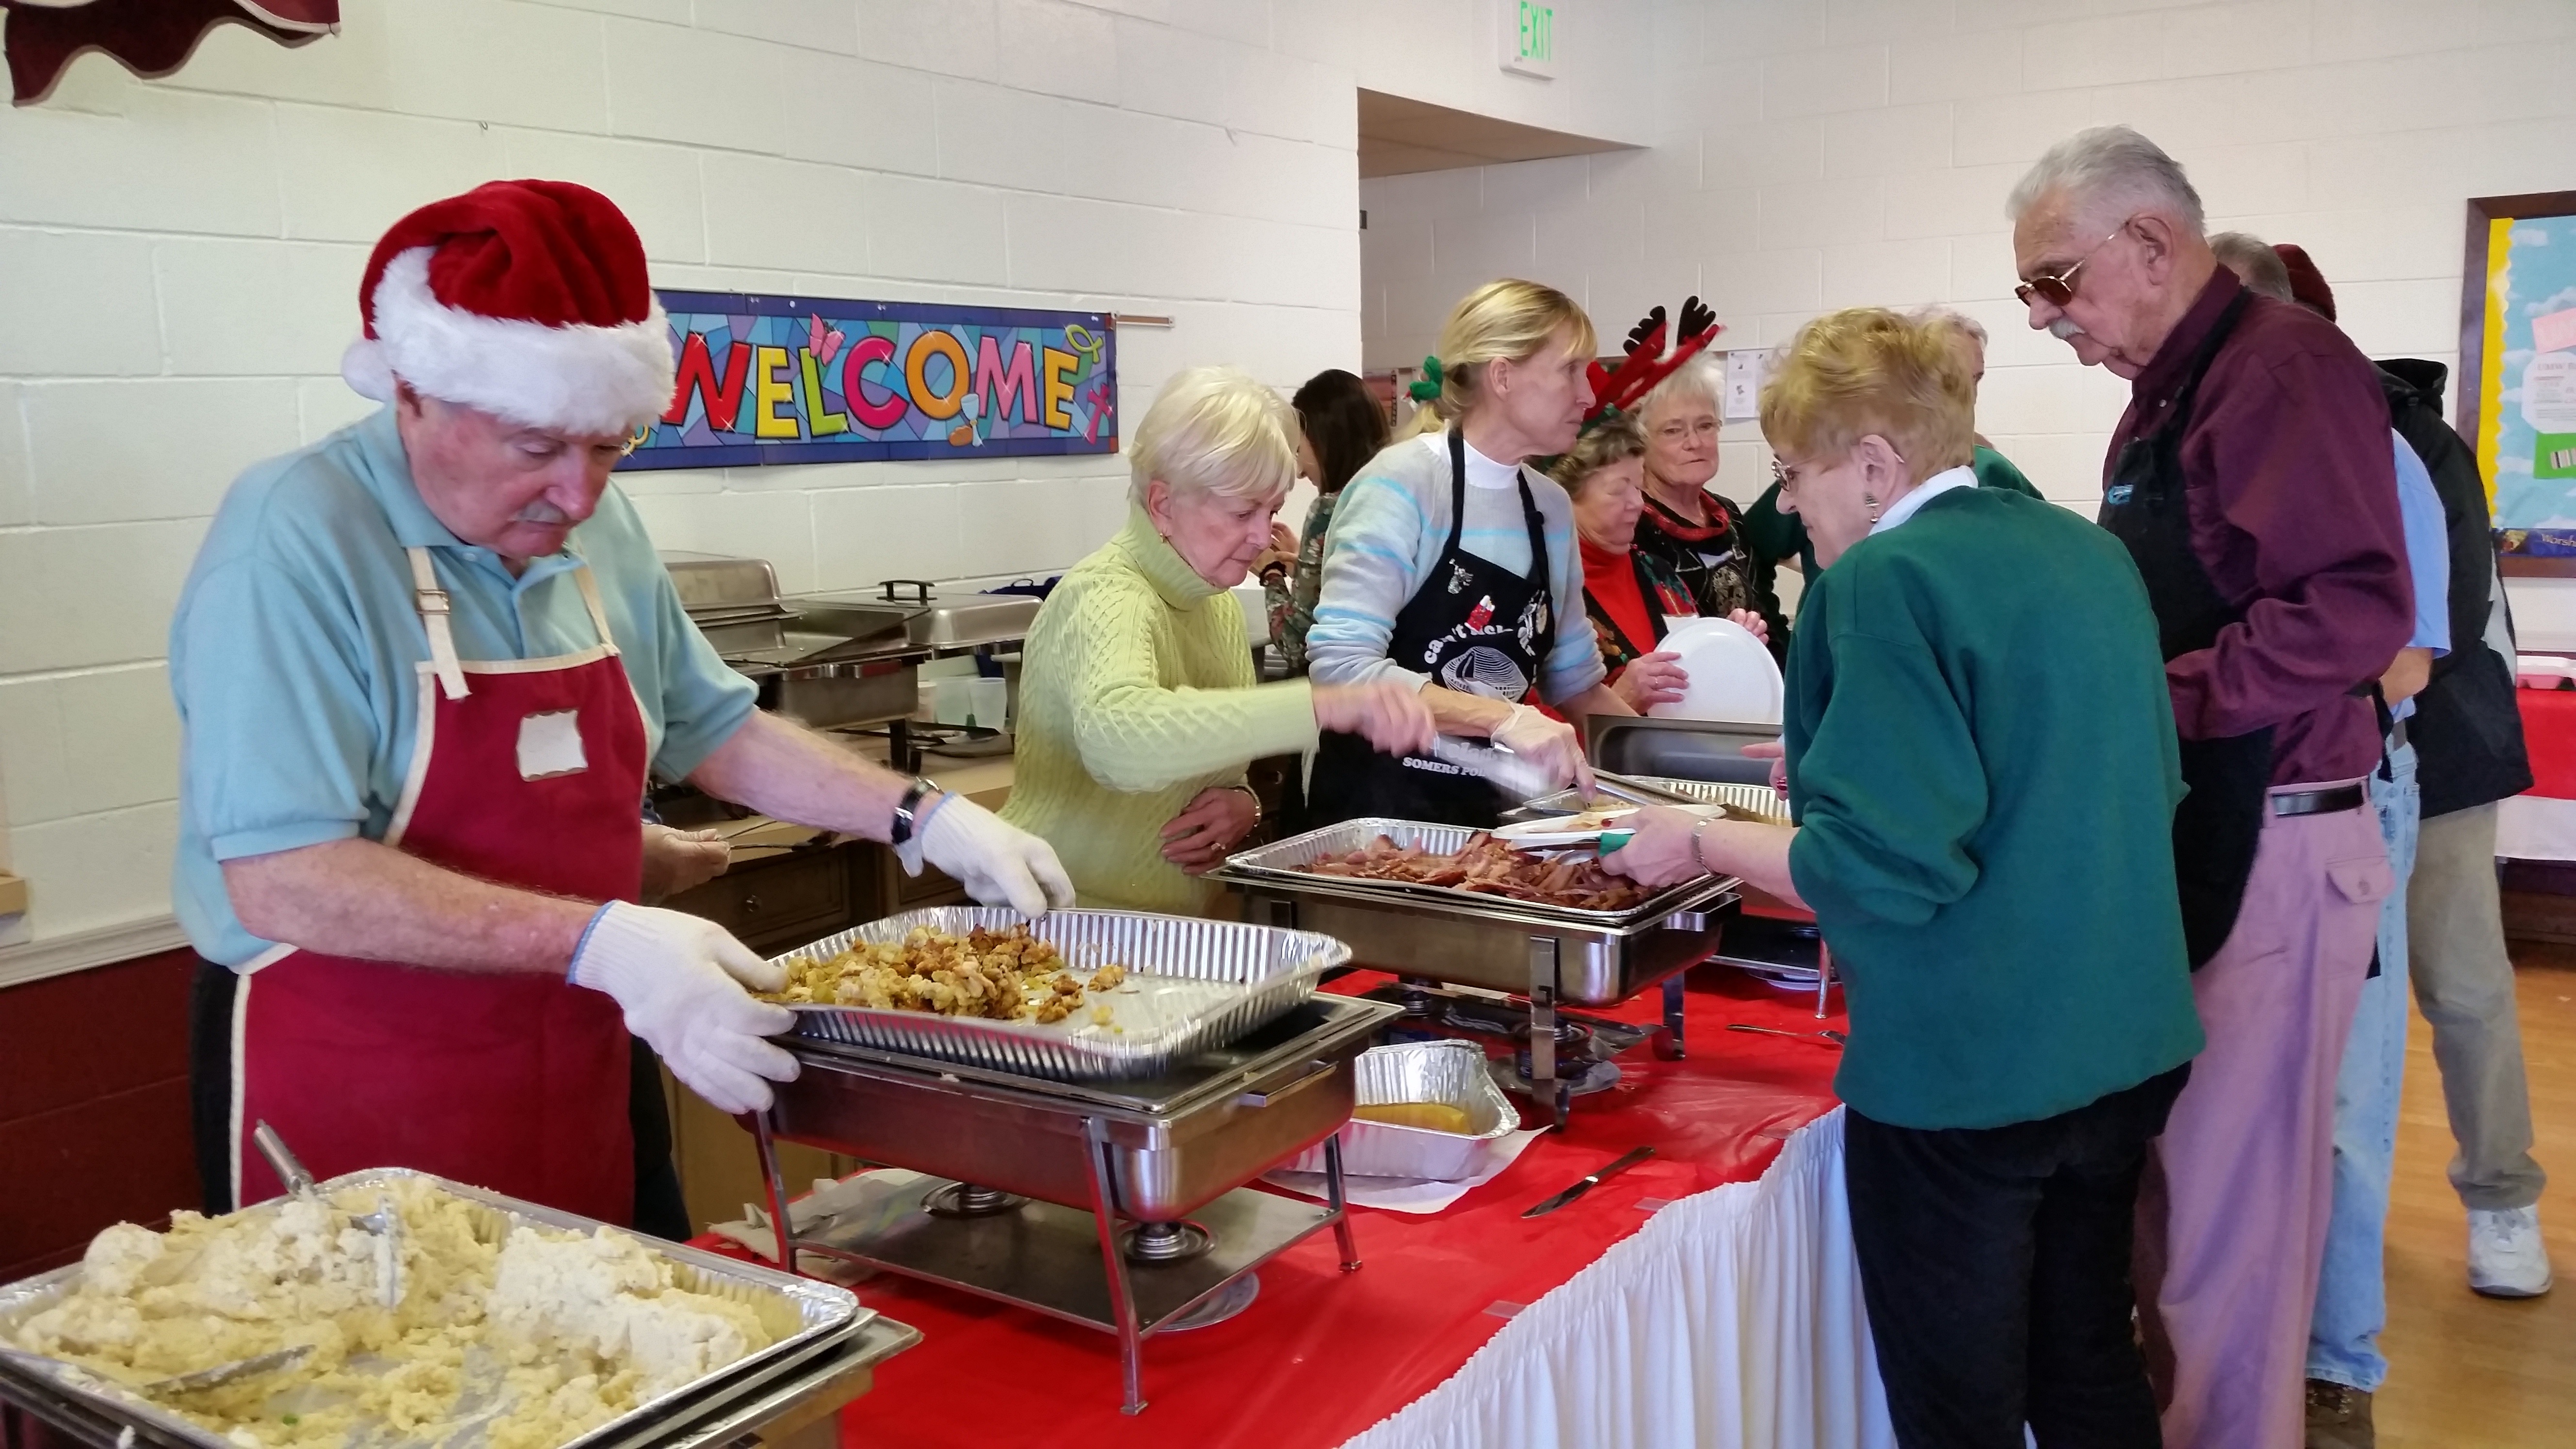 The Spirit of Giving is Alive at Community Christmas Dinner in Ocean City |  OCNJ Daily